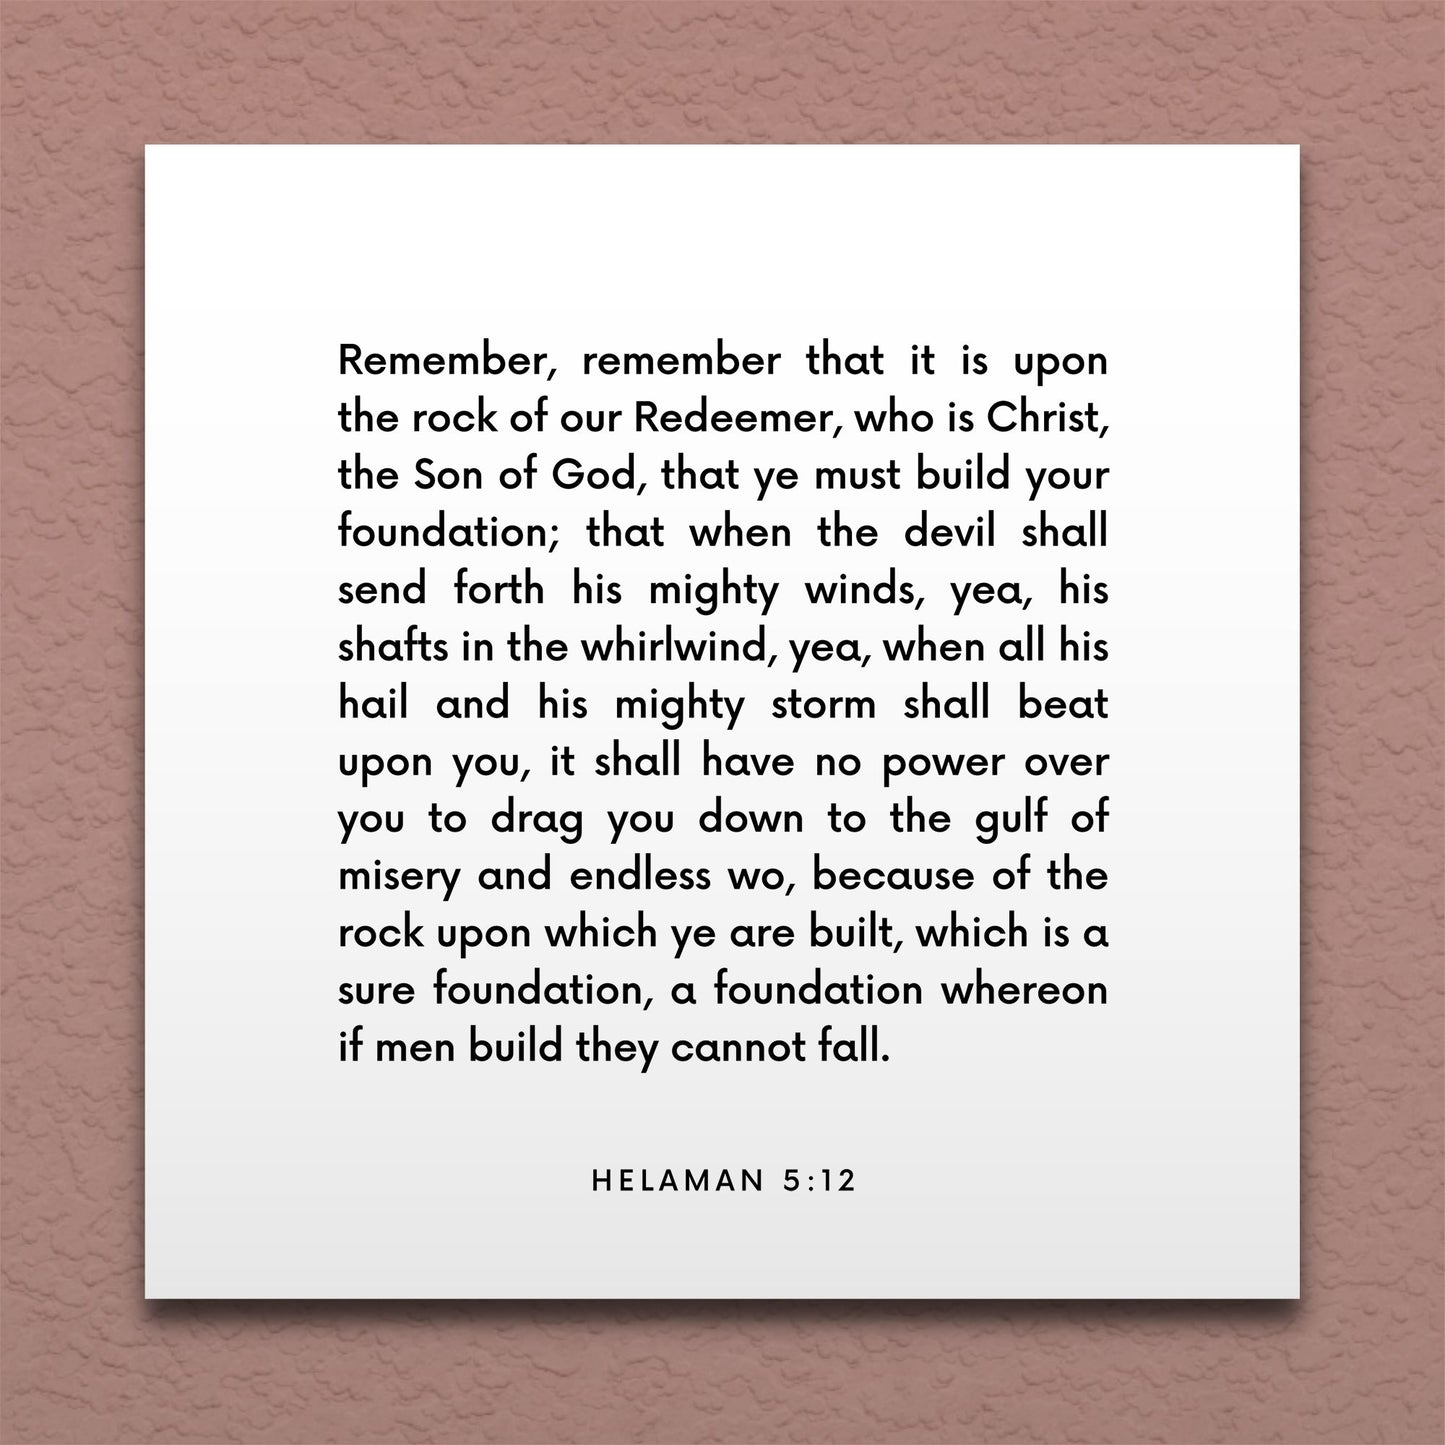 Wall-mounted scripture tile for Helaman 5:12 - "Remember that it is upon the rock of our Redeemer"